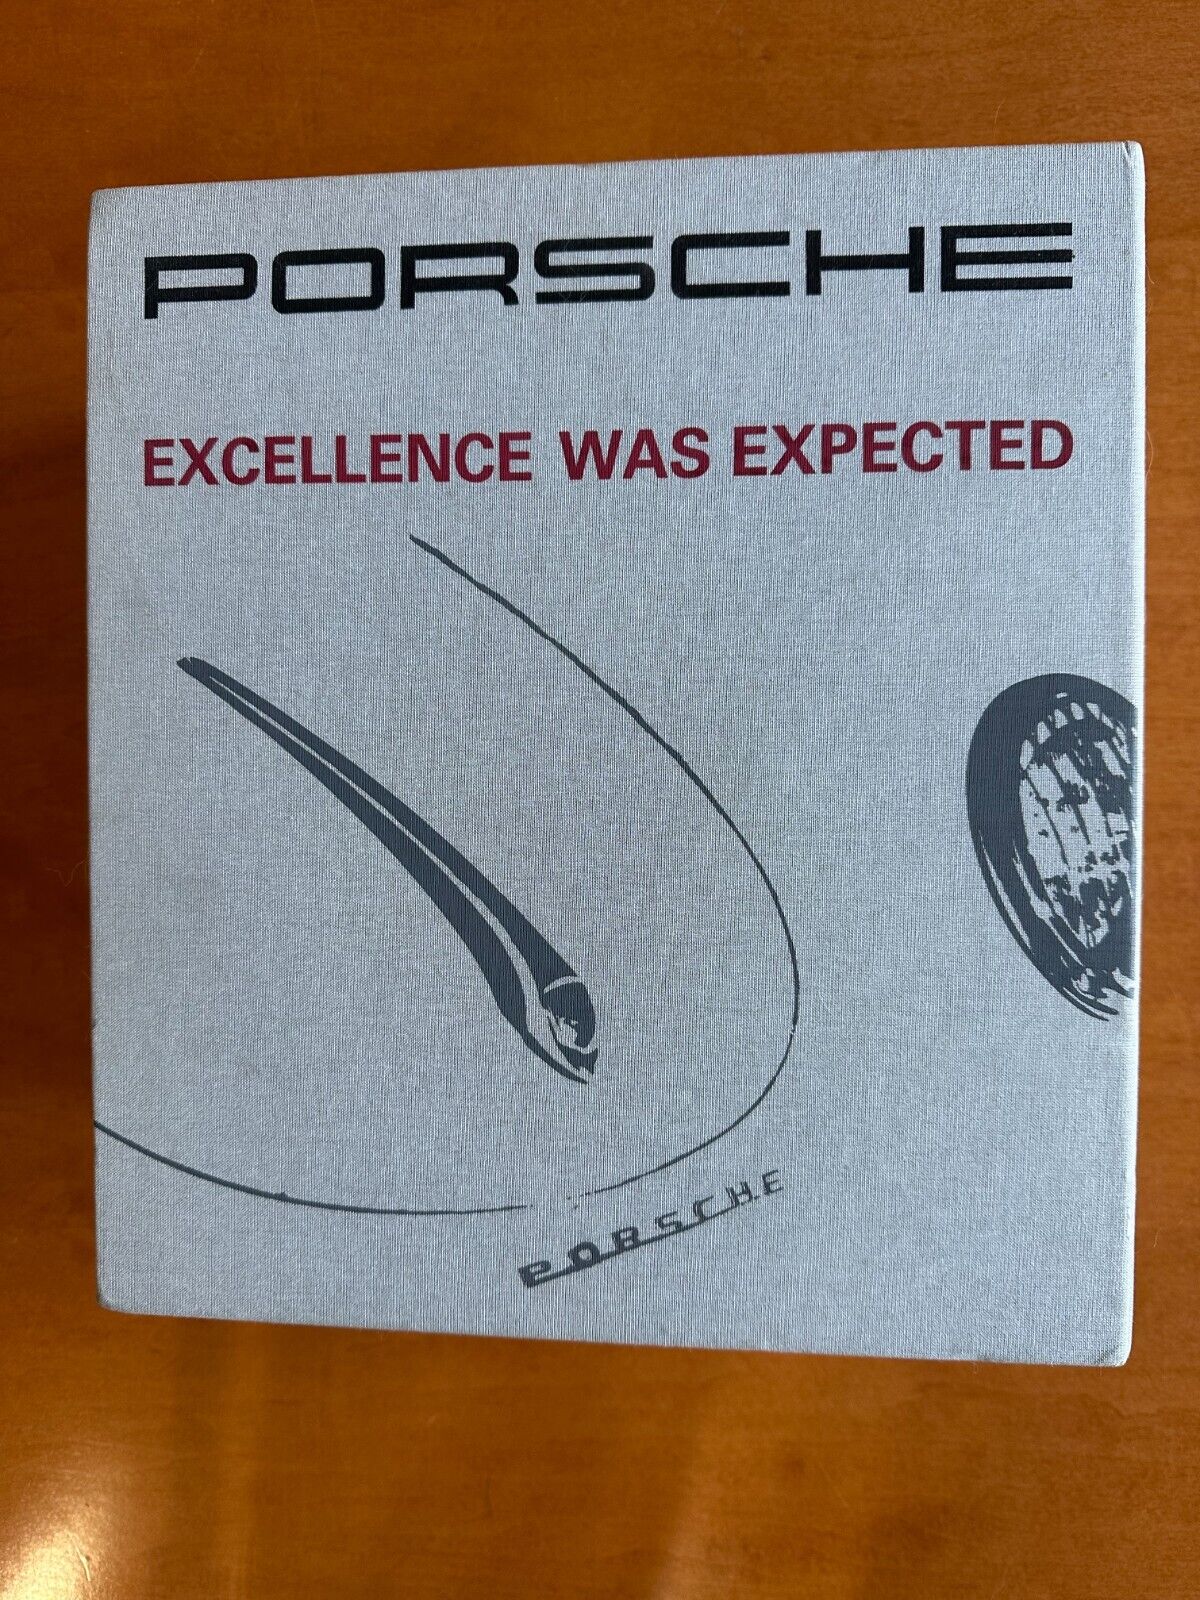 Porsche Excellence Was Expected, 3 Volume Set, 2003, Slightly Used